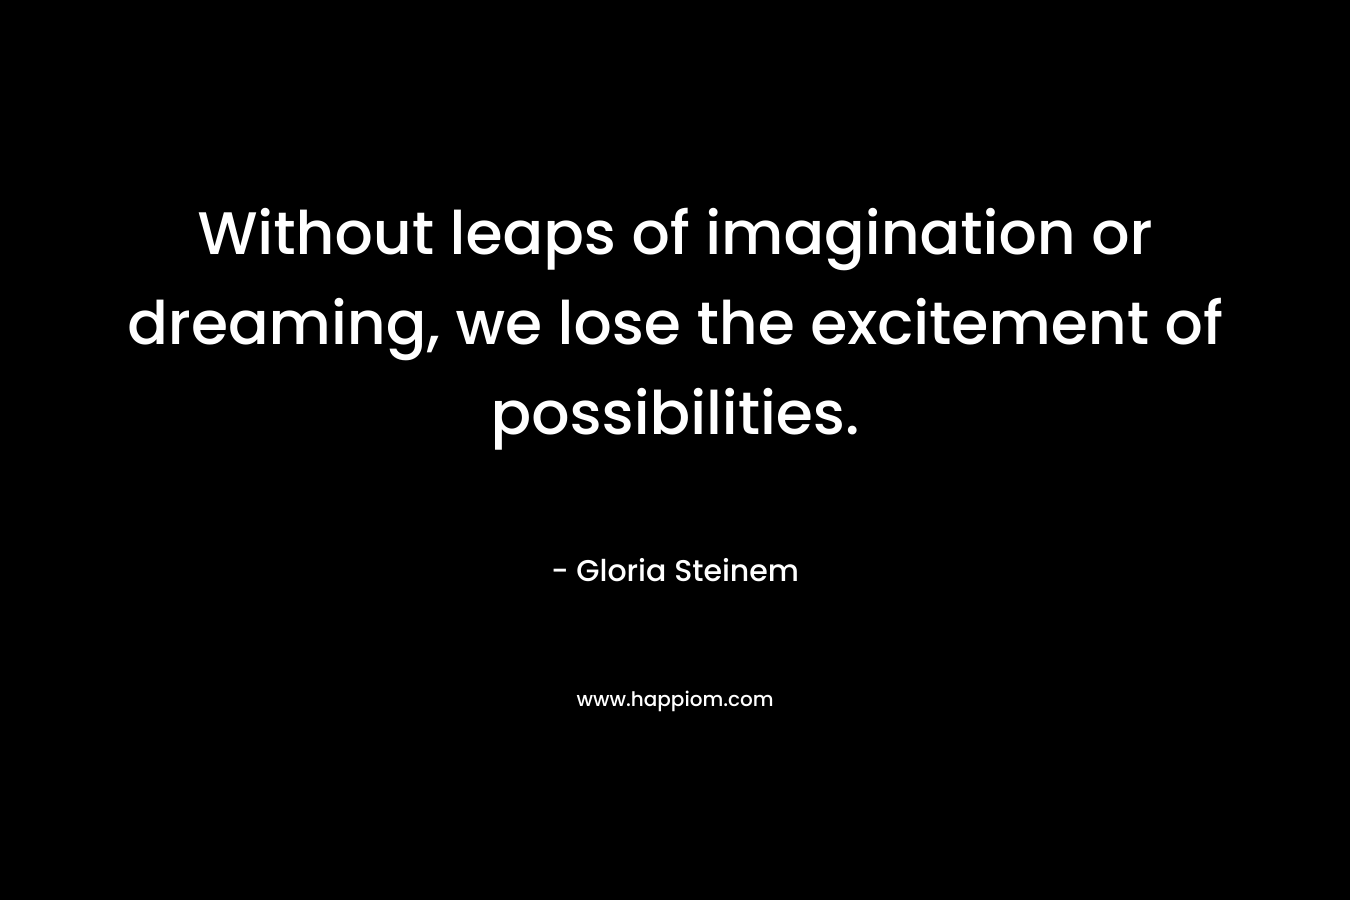 Without leaps of imagination or dreaming, we lose the excitement of possibilities.